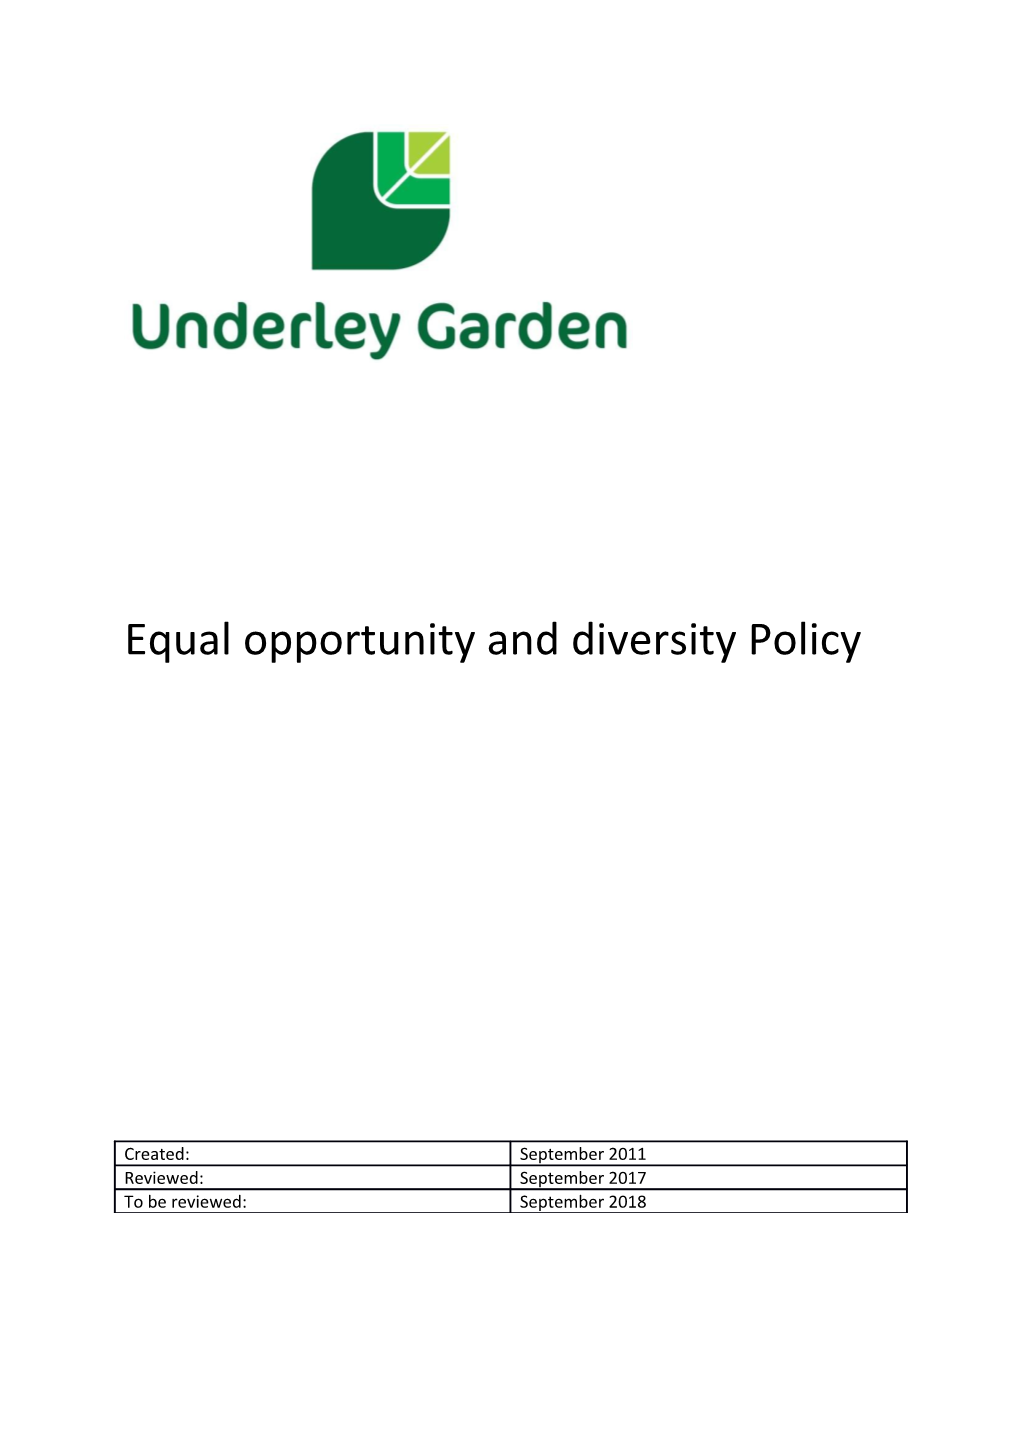 Equal Opportunity and Diversity Policy